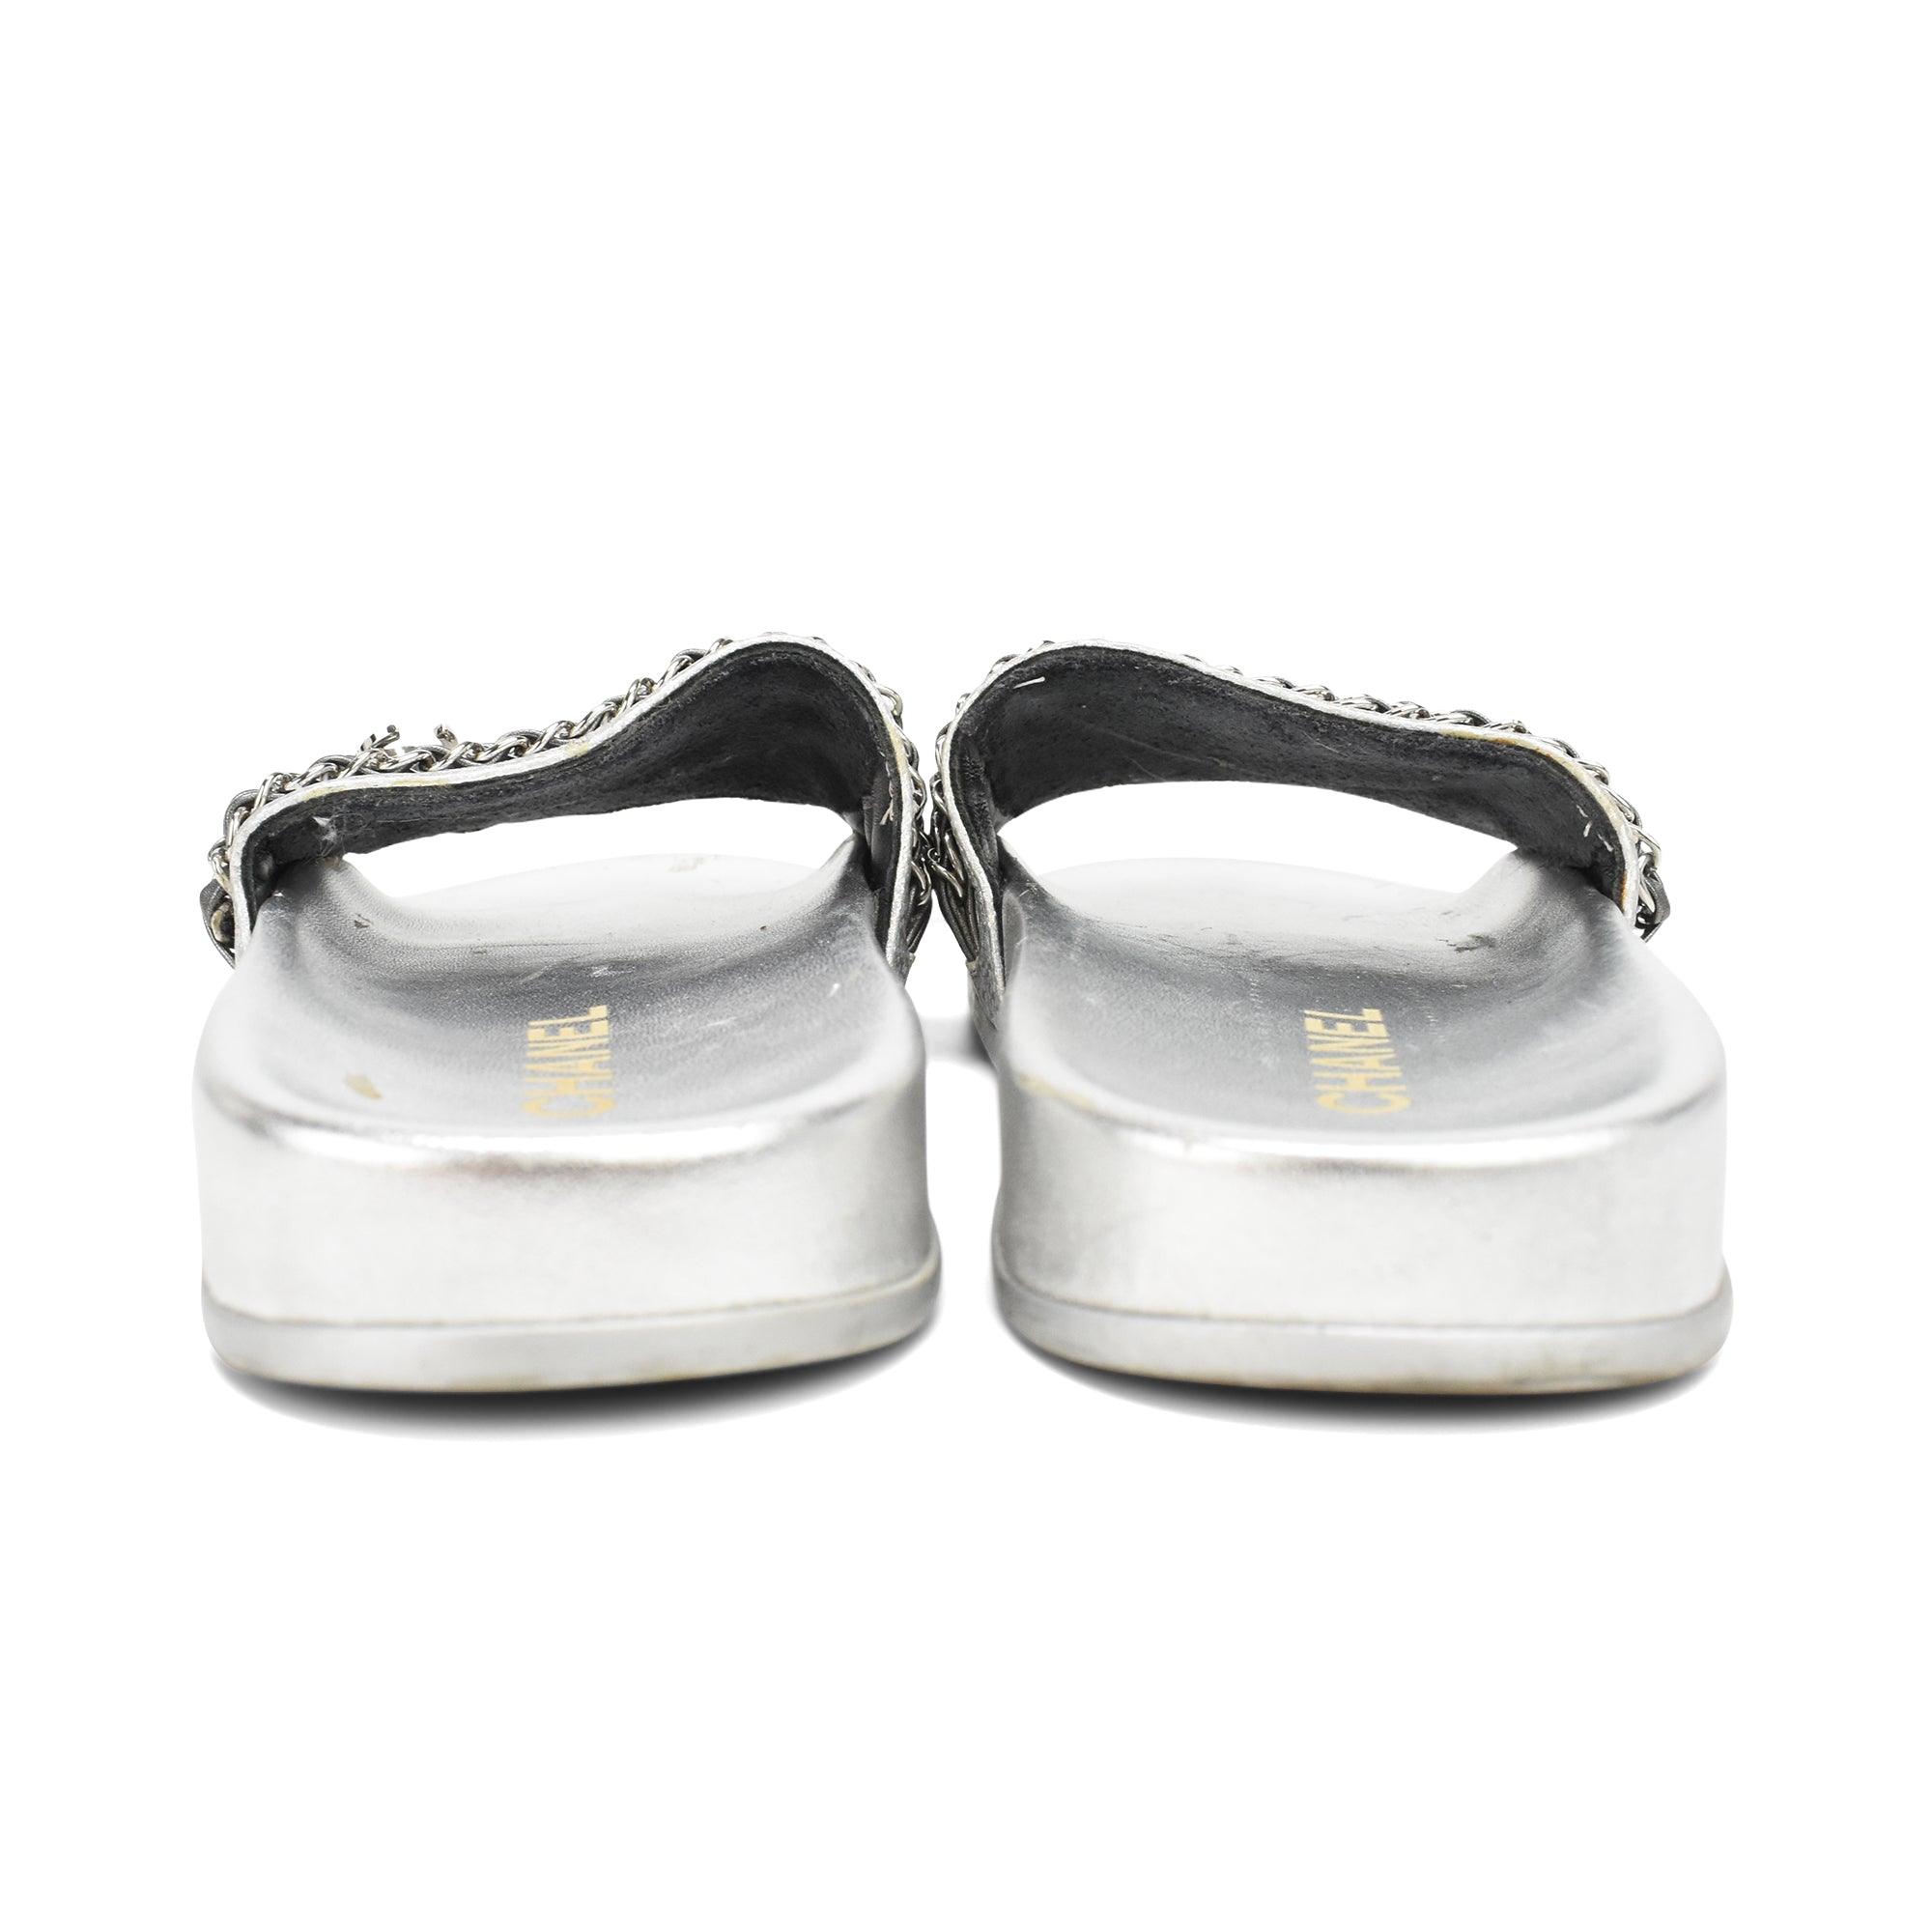 Chanel Chain Slides - Women's 37 - Fashionably Yours